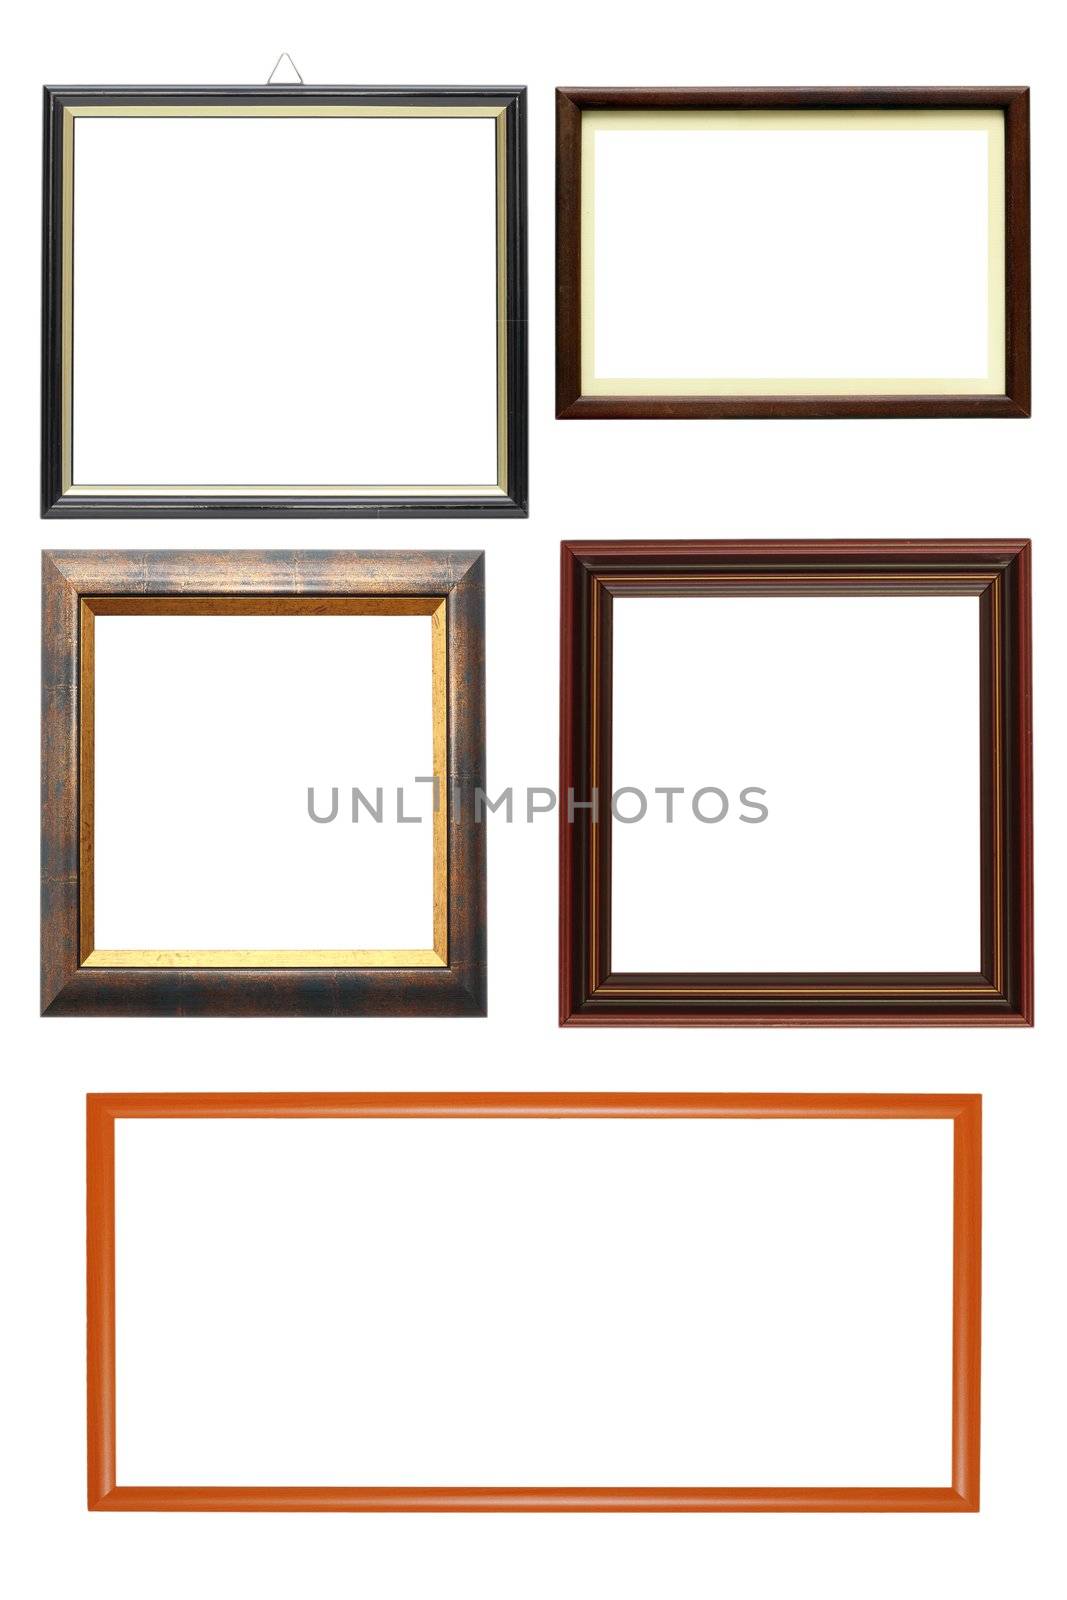 collections of wooden frames isolated over white background